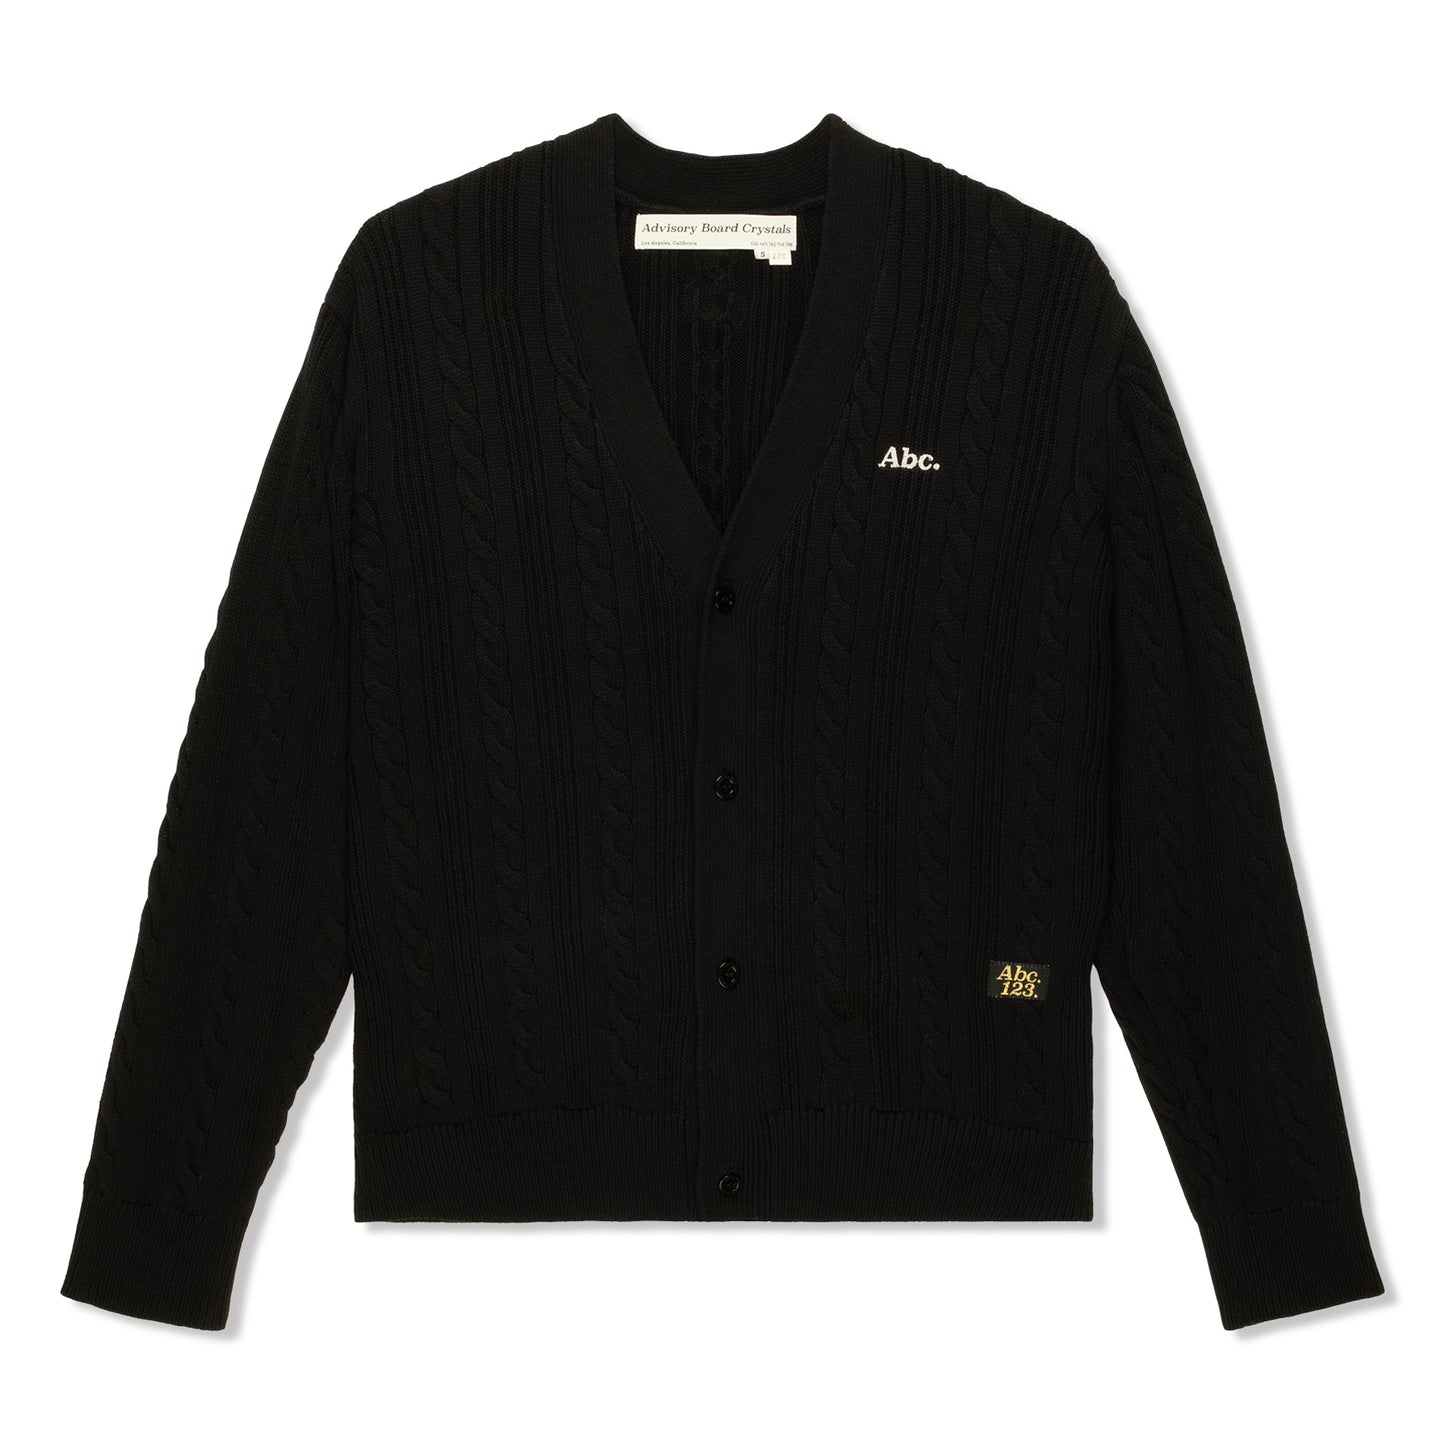 Advisory Board Crystals Abc. 123. Cableknit Cardigan (Anthracite Black)